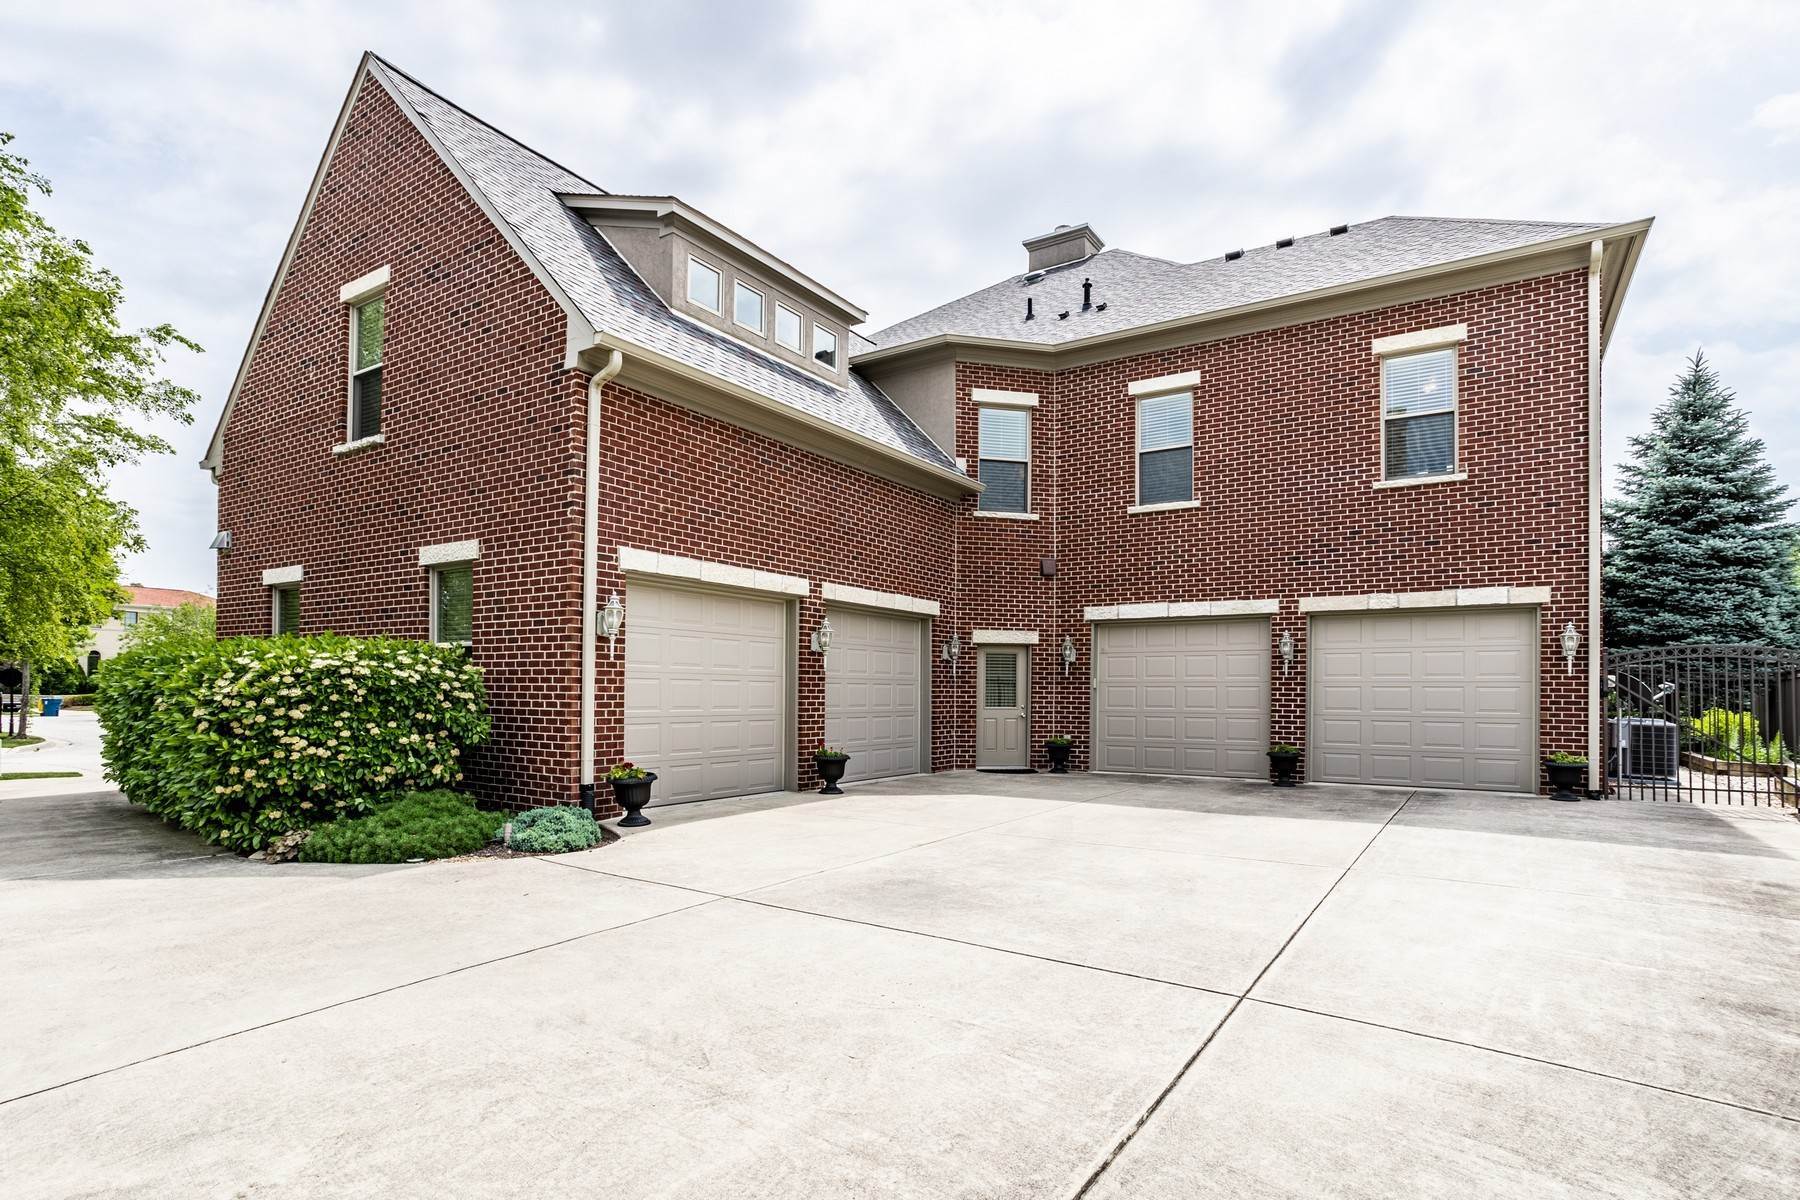 44. Single Family Homes for Sale at Village of WestClay Stunner 1906 Broughton Carmel, Indiana 46032 United States